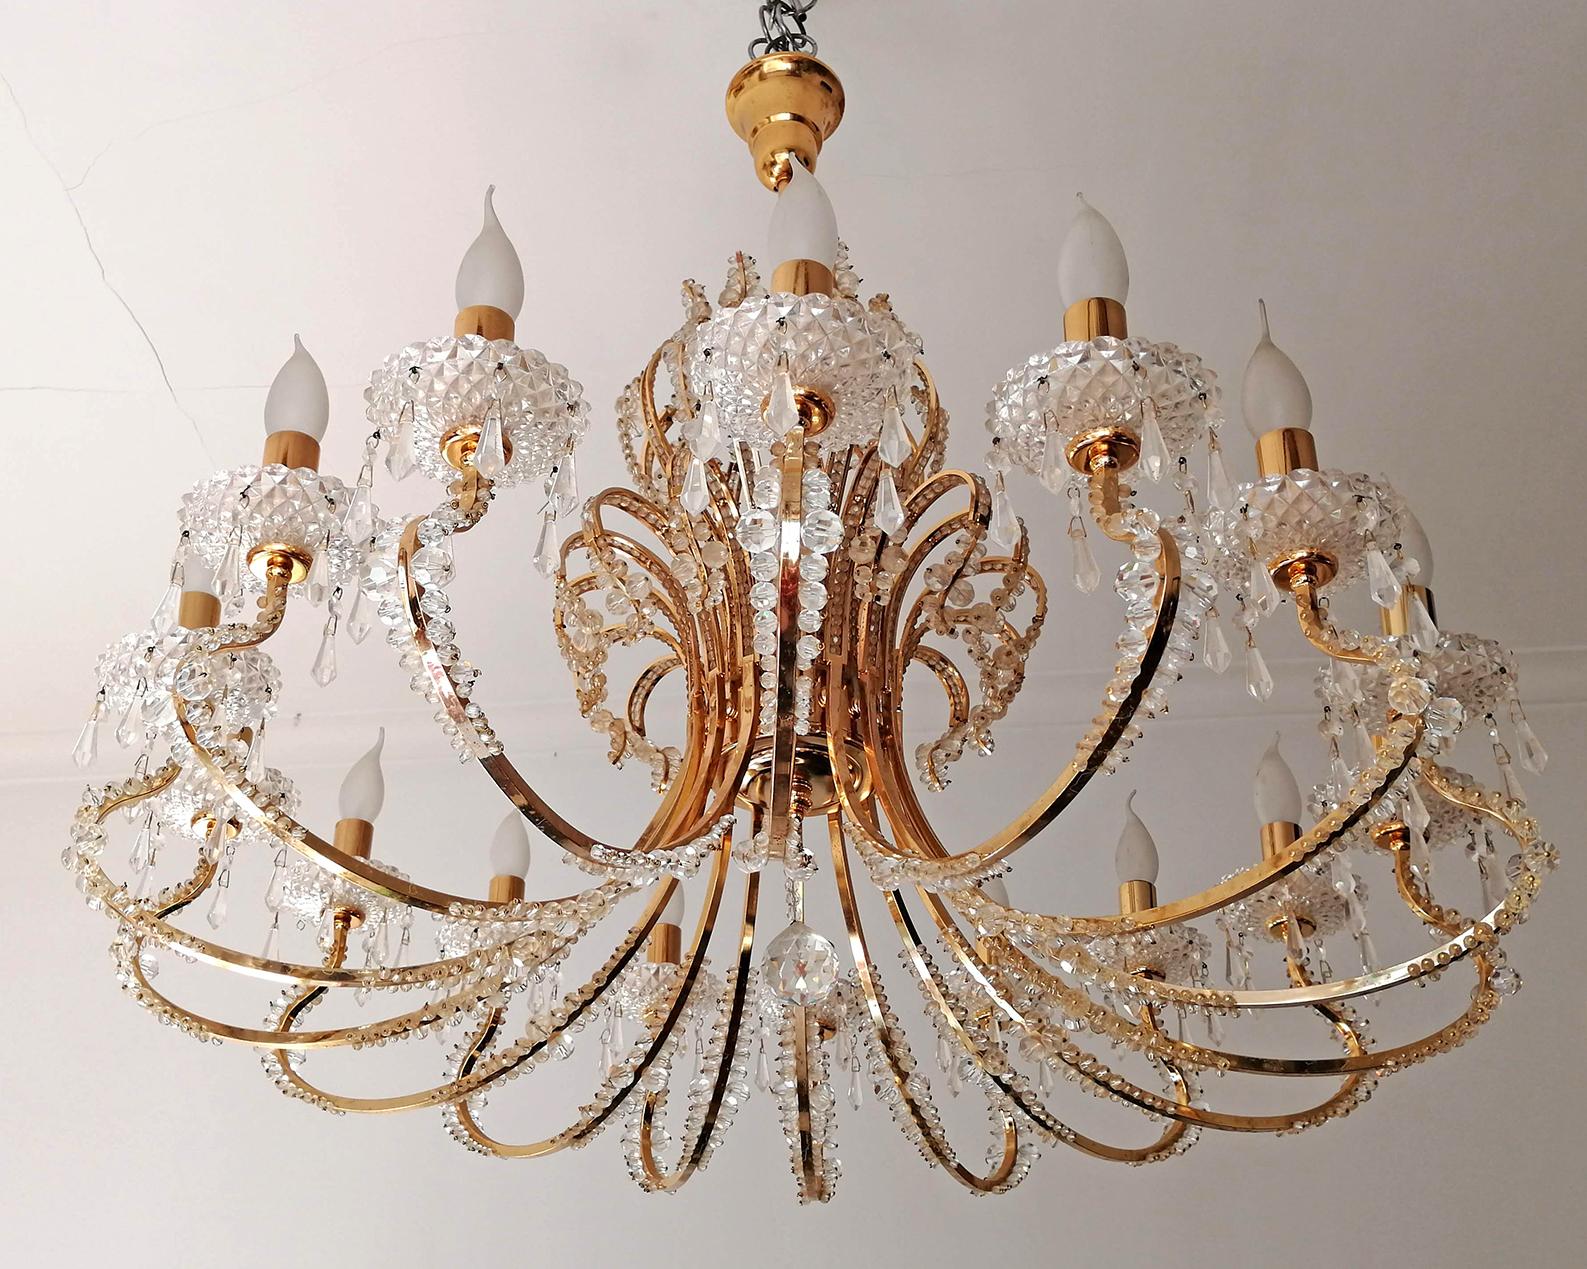 Stunning extra large impressive Empire cut crystal and gilt brass 19-light chandelier with crystal drops.
Measures:
Diameter 37.8 in/ 96 cm
Height 35.5 in / 90 cm
Weight 44 lb/20 Kg
19 light bulbs E14/ good working condition.
Assembly required.